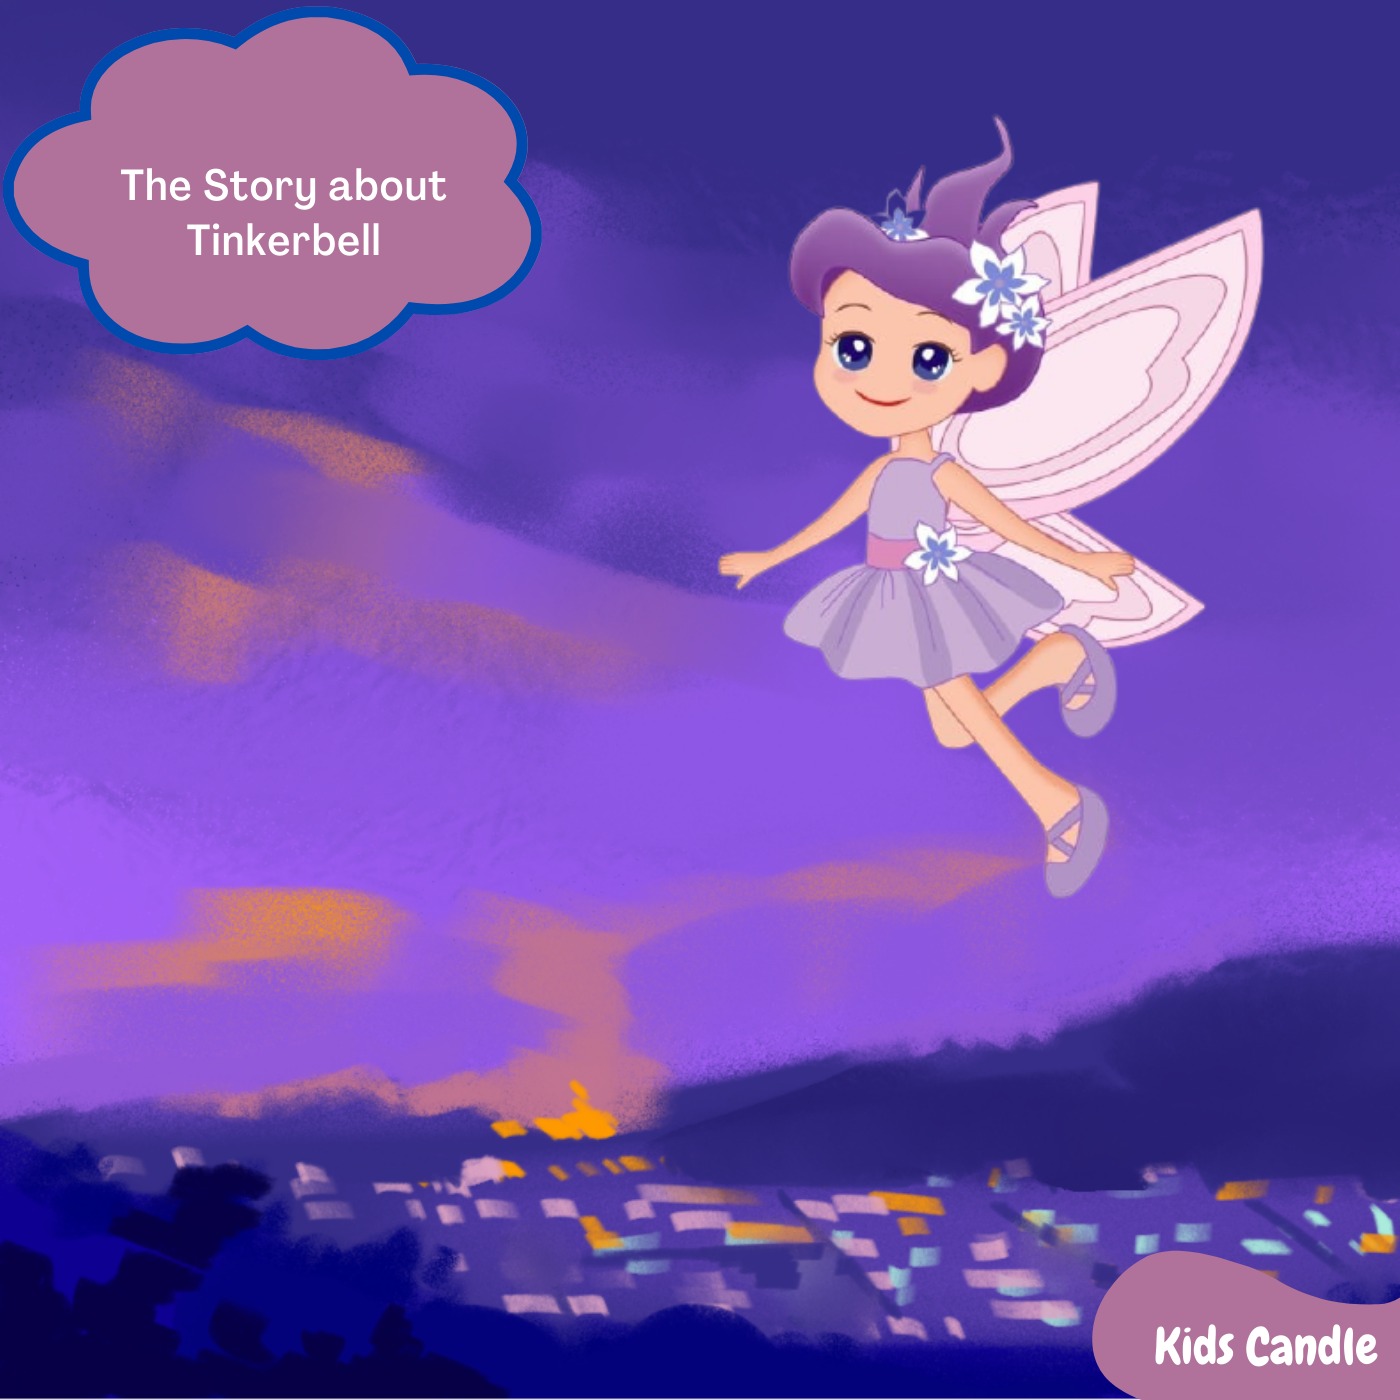 The Story about Tinkerbell